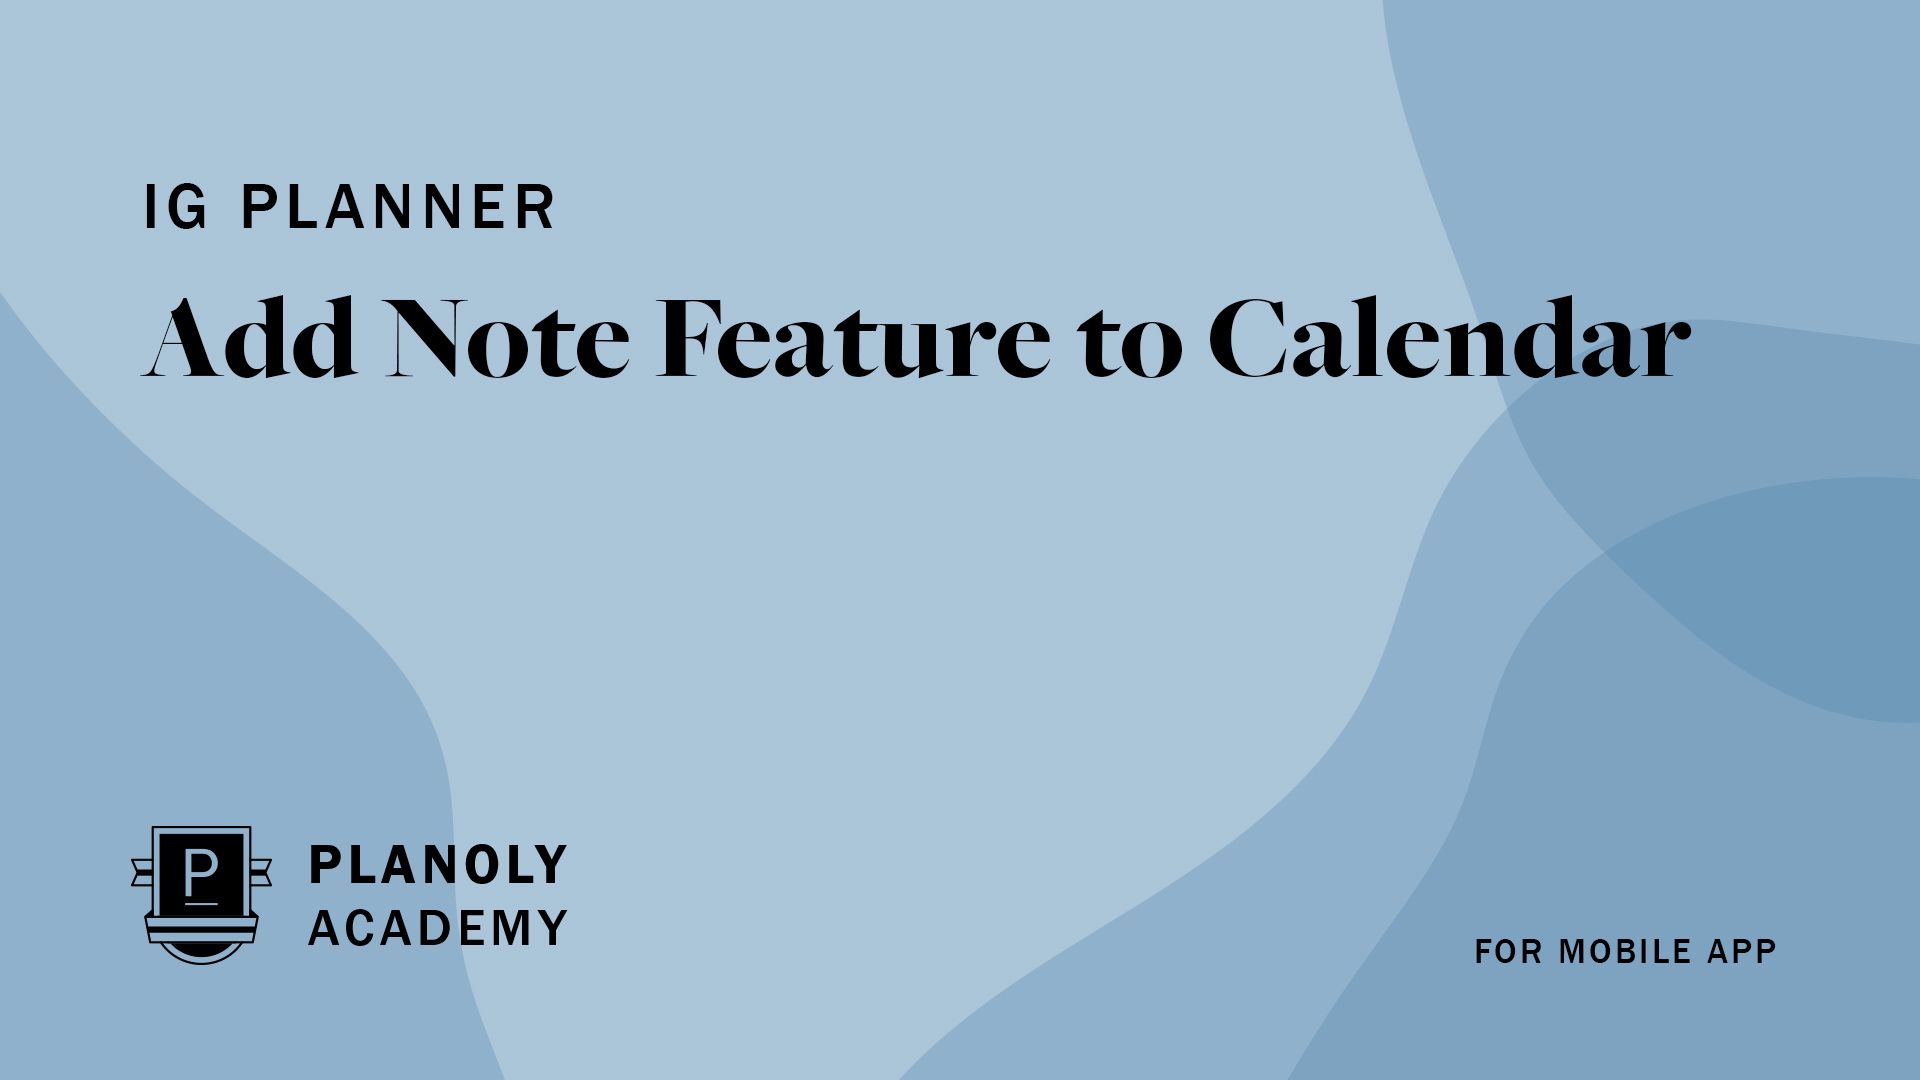 How to Add Note to Calendar